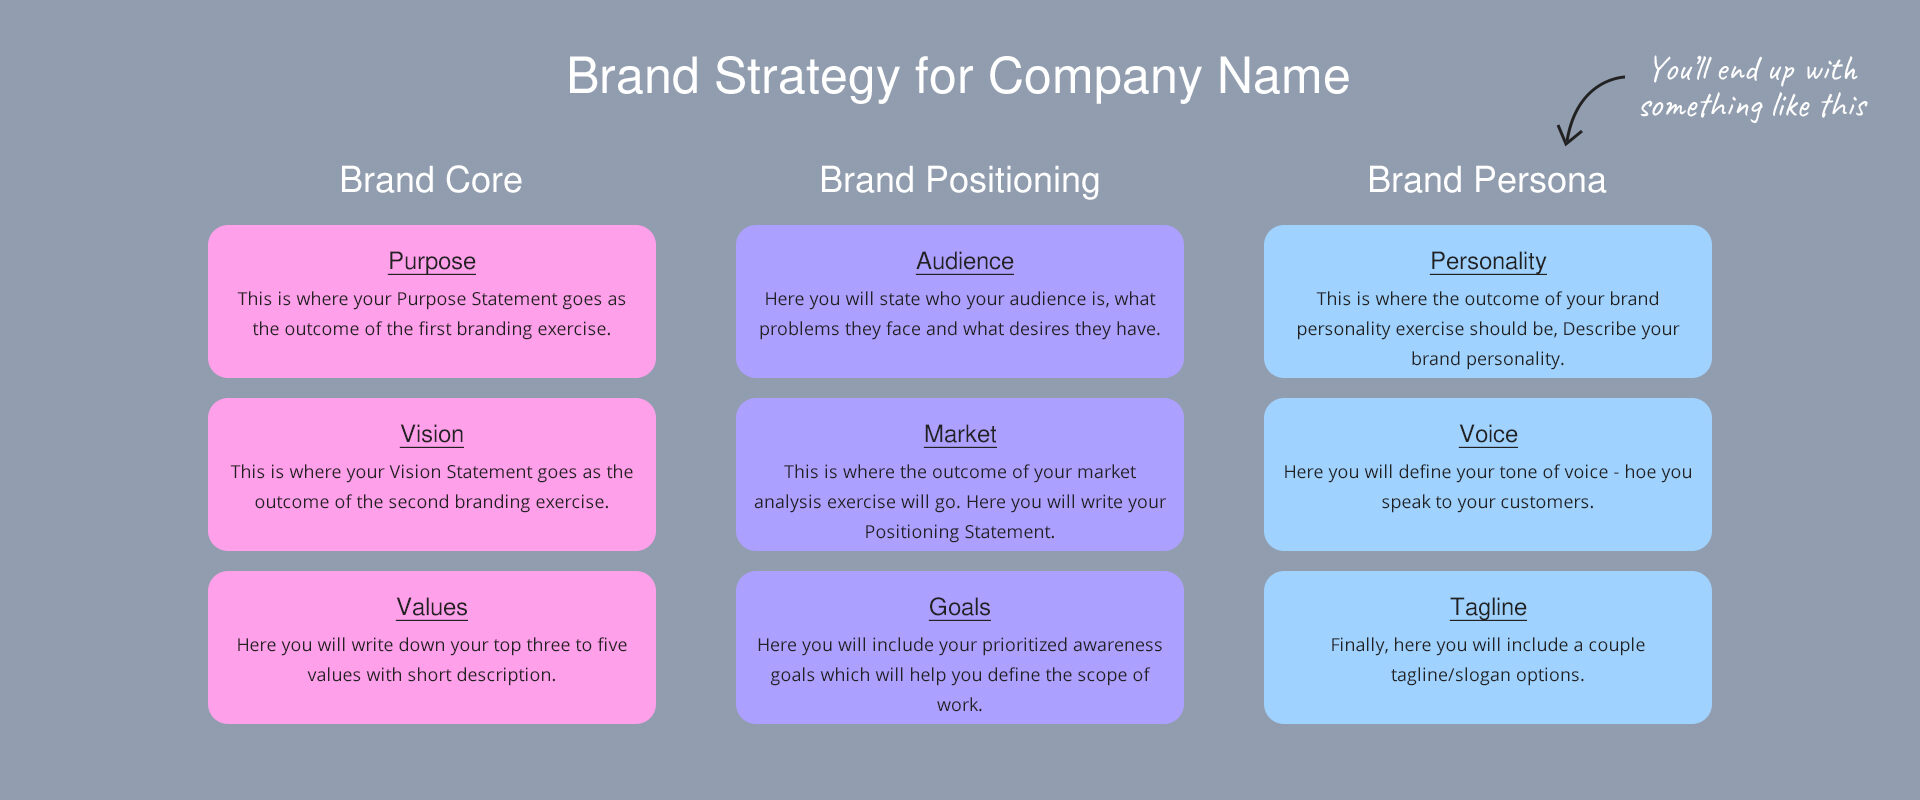 Brand Strategy for businesses